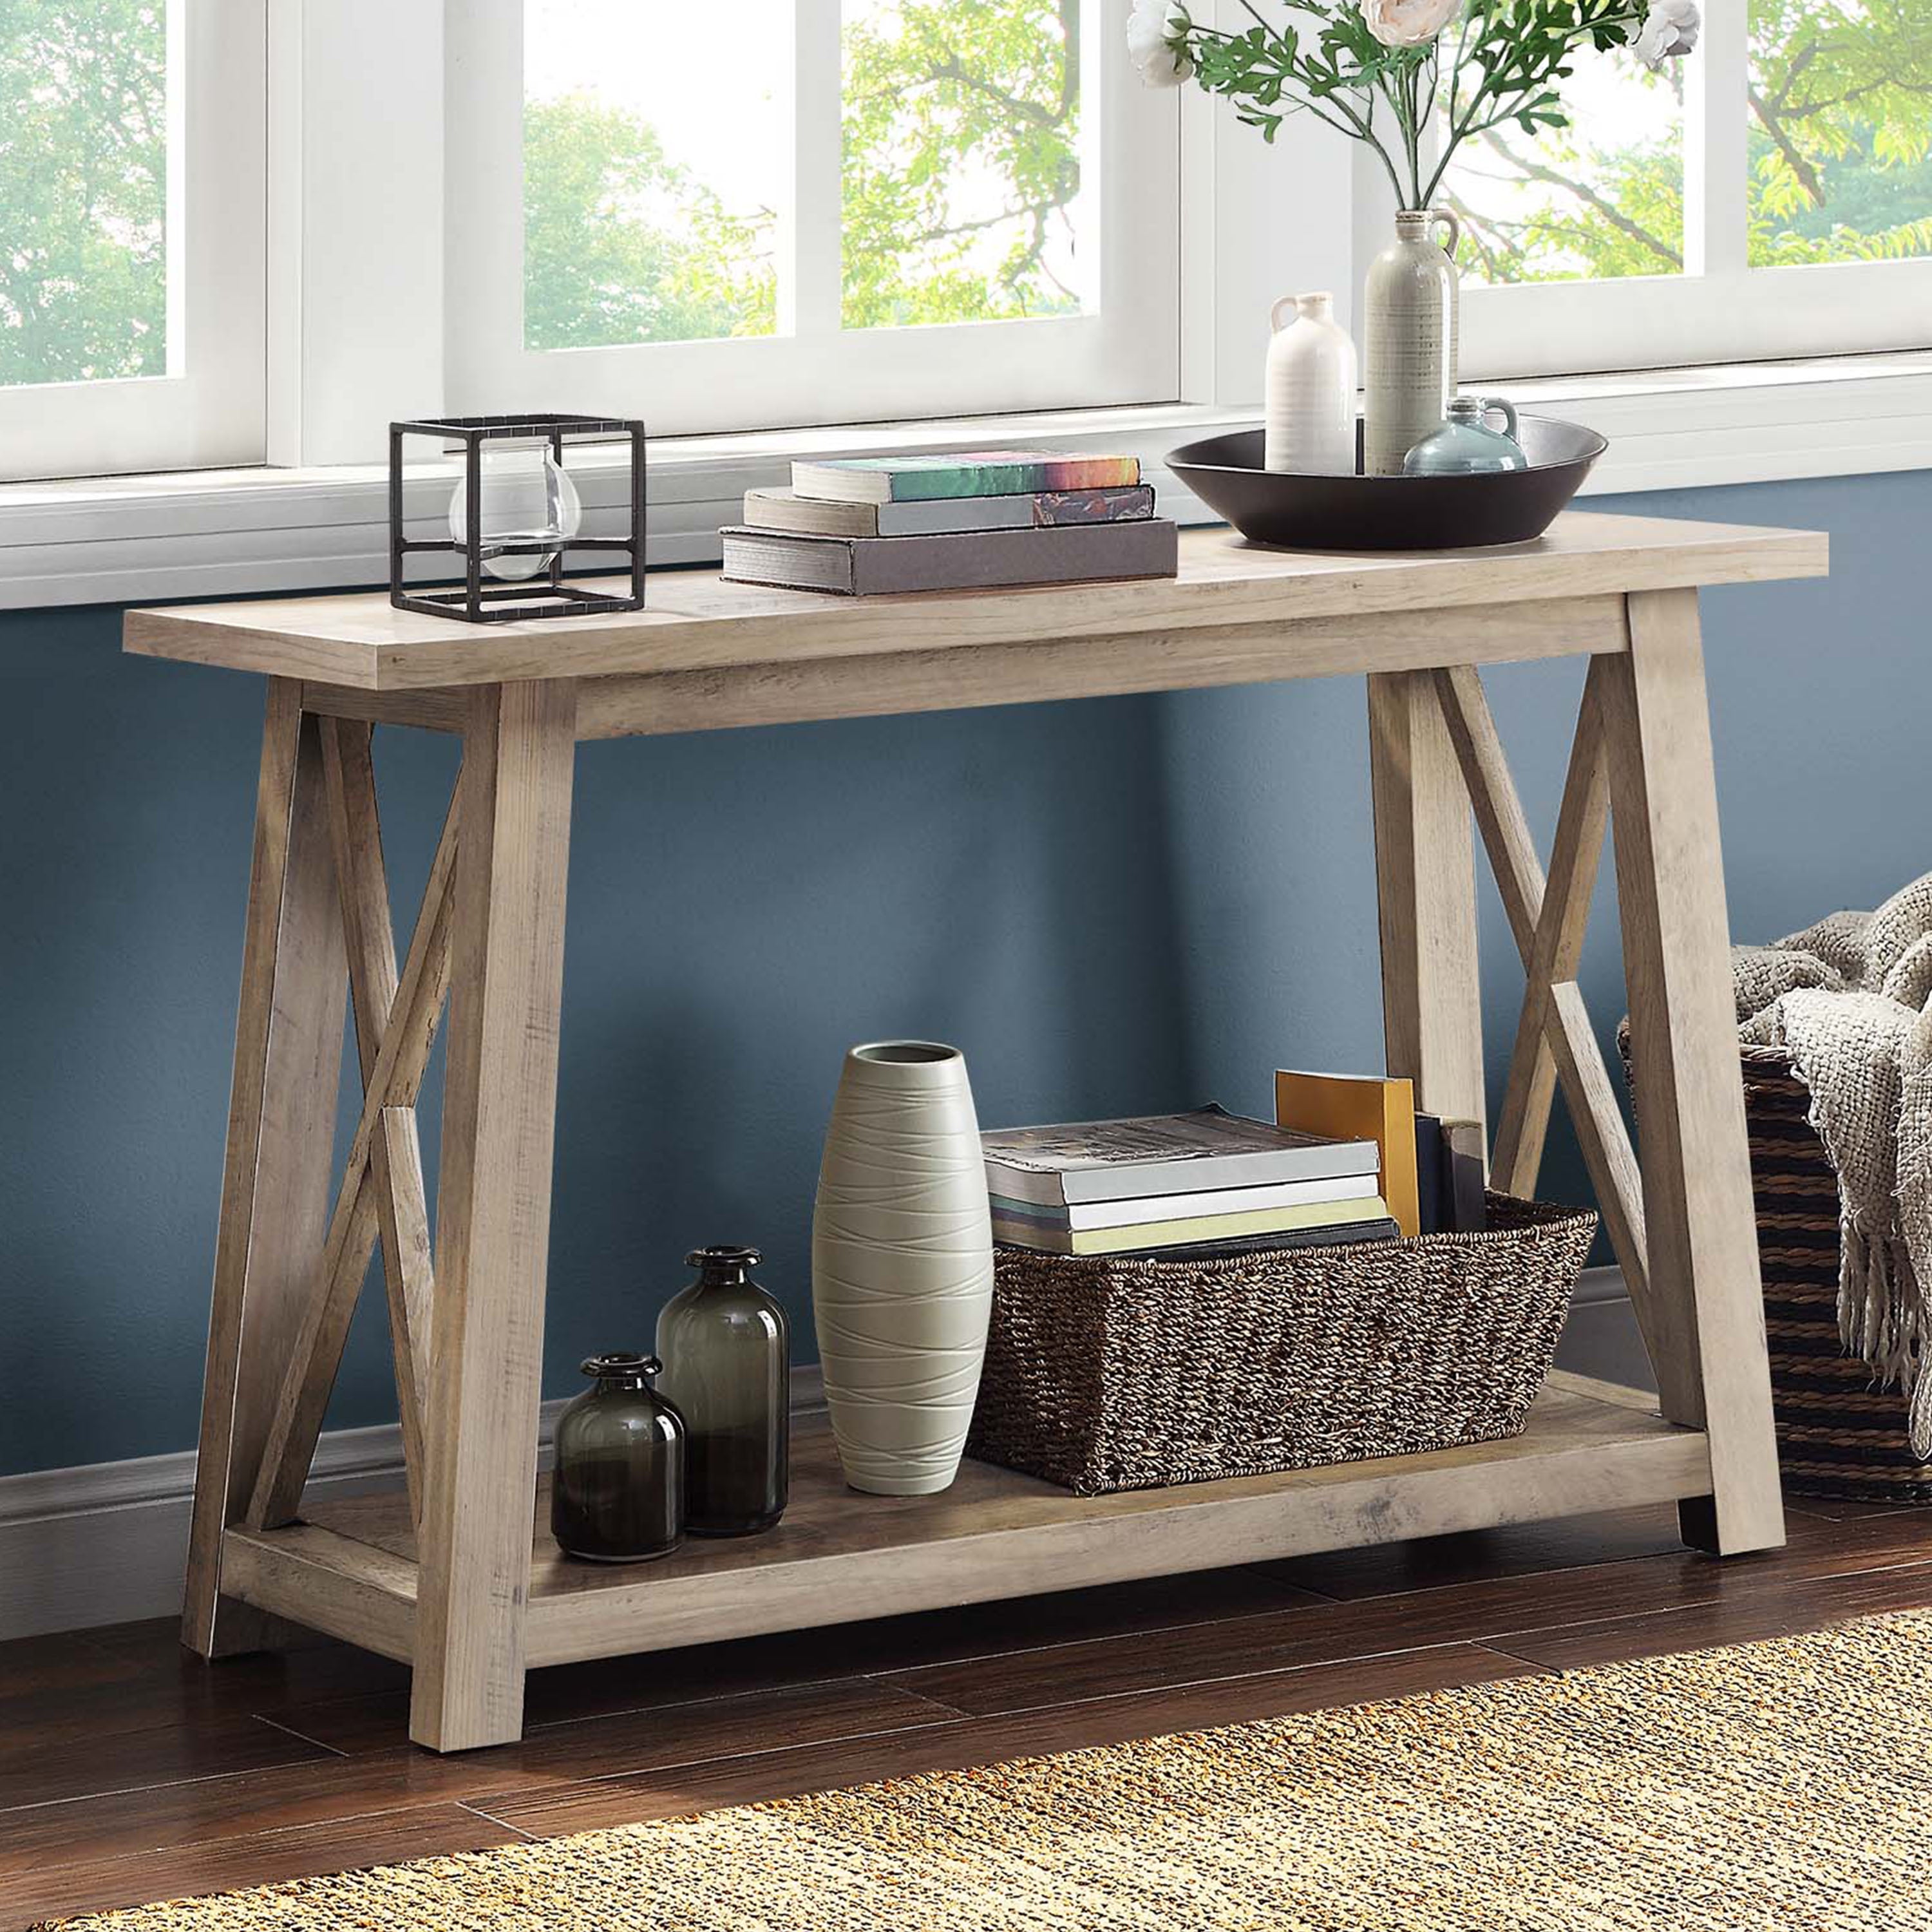 20 inch wide console table